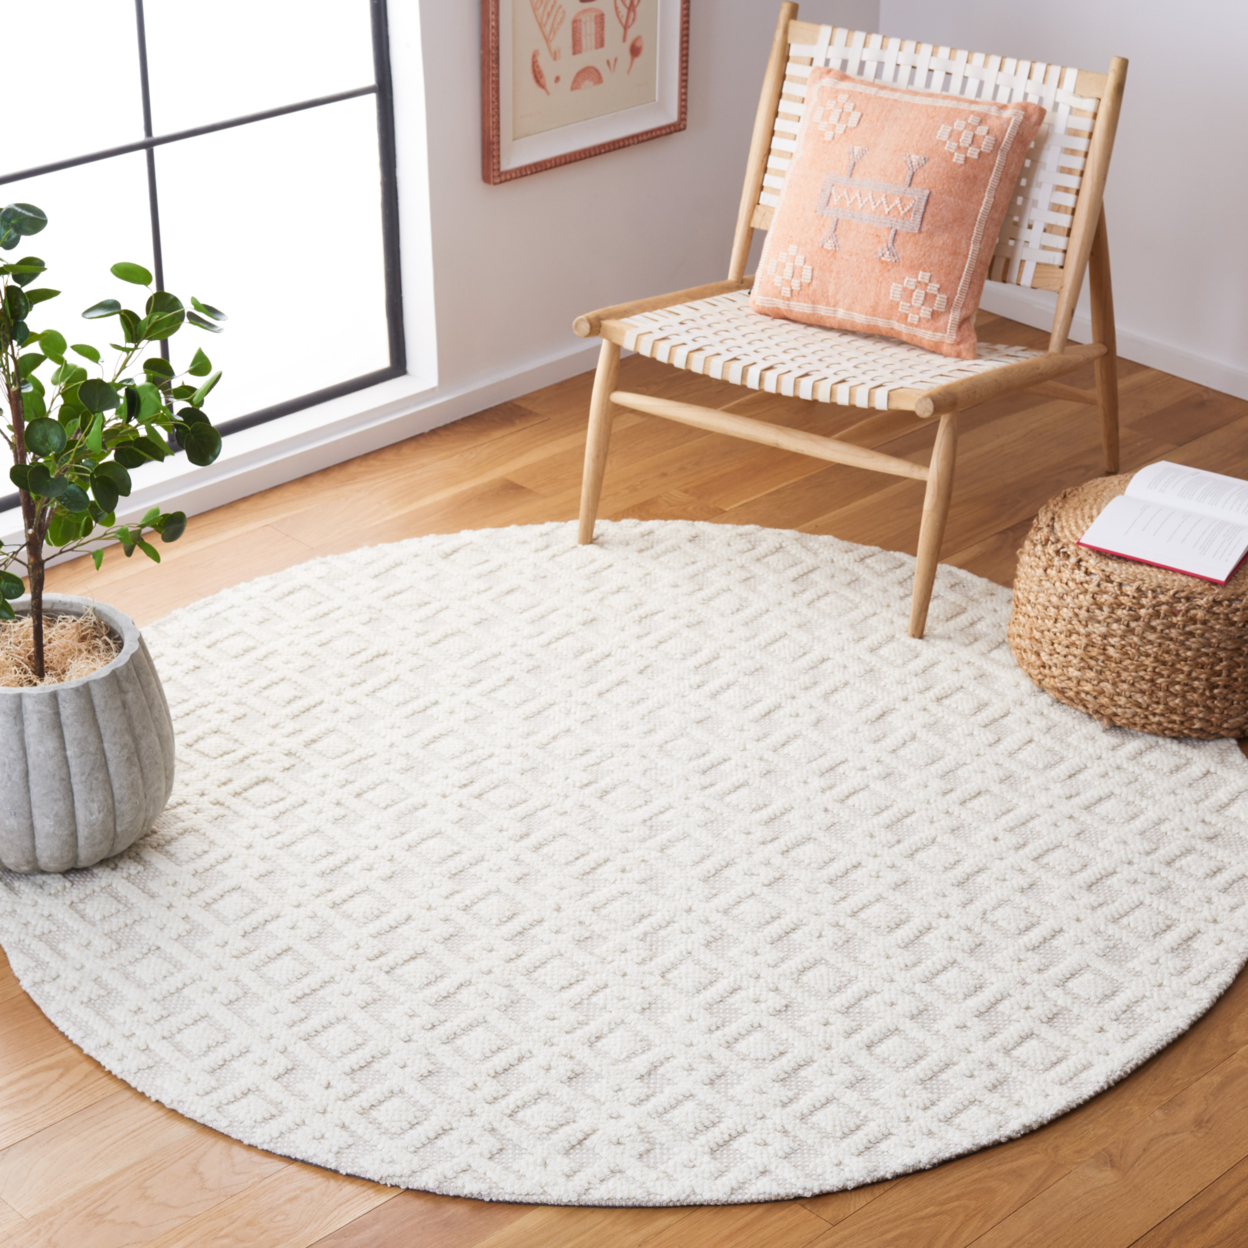 SAFAVIEH Vermont Collection VRM102A Handwoven Ivory Rug - 2-3 X 10